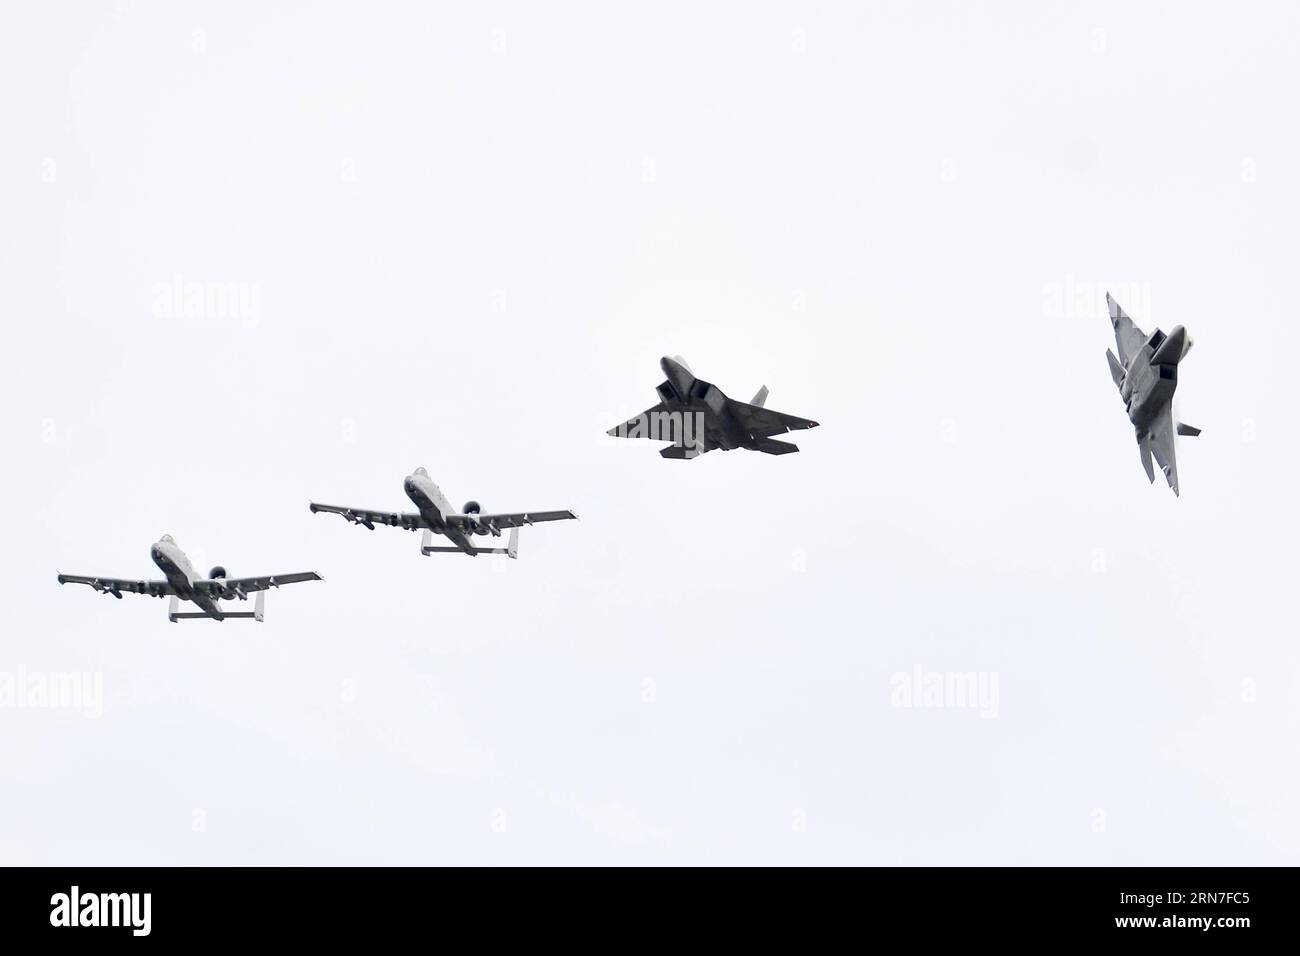 (150904) -- AMARI, Sept. 4, 2015 -- A-10 and F-22 US Airforce aircrafts fly over the Amari airbase in Estonia on Sept. 4, 2015. U.S. Air Forces Europe and Air Forces Africa Public Affairs made trial flights at Amari Air Base, Estonia, a reinforcement of the increased flying operations in the Baltic and Europe, as well as Estonia s ability to support rotational deployments of U.S. Air Force aircraft.) ESTONIA-AMARI-TRAIL FLIGHT SergeixStepanov PUBLICATIONxNOTxINxCHN   150904 Amari Sept 4 2015 a 10 and F 22 U.S. Airforce aircraft Fly Over The Amari Airbase in Estonia ON Sept 4 2015 U S Air Force Stock Photo